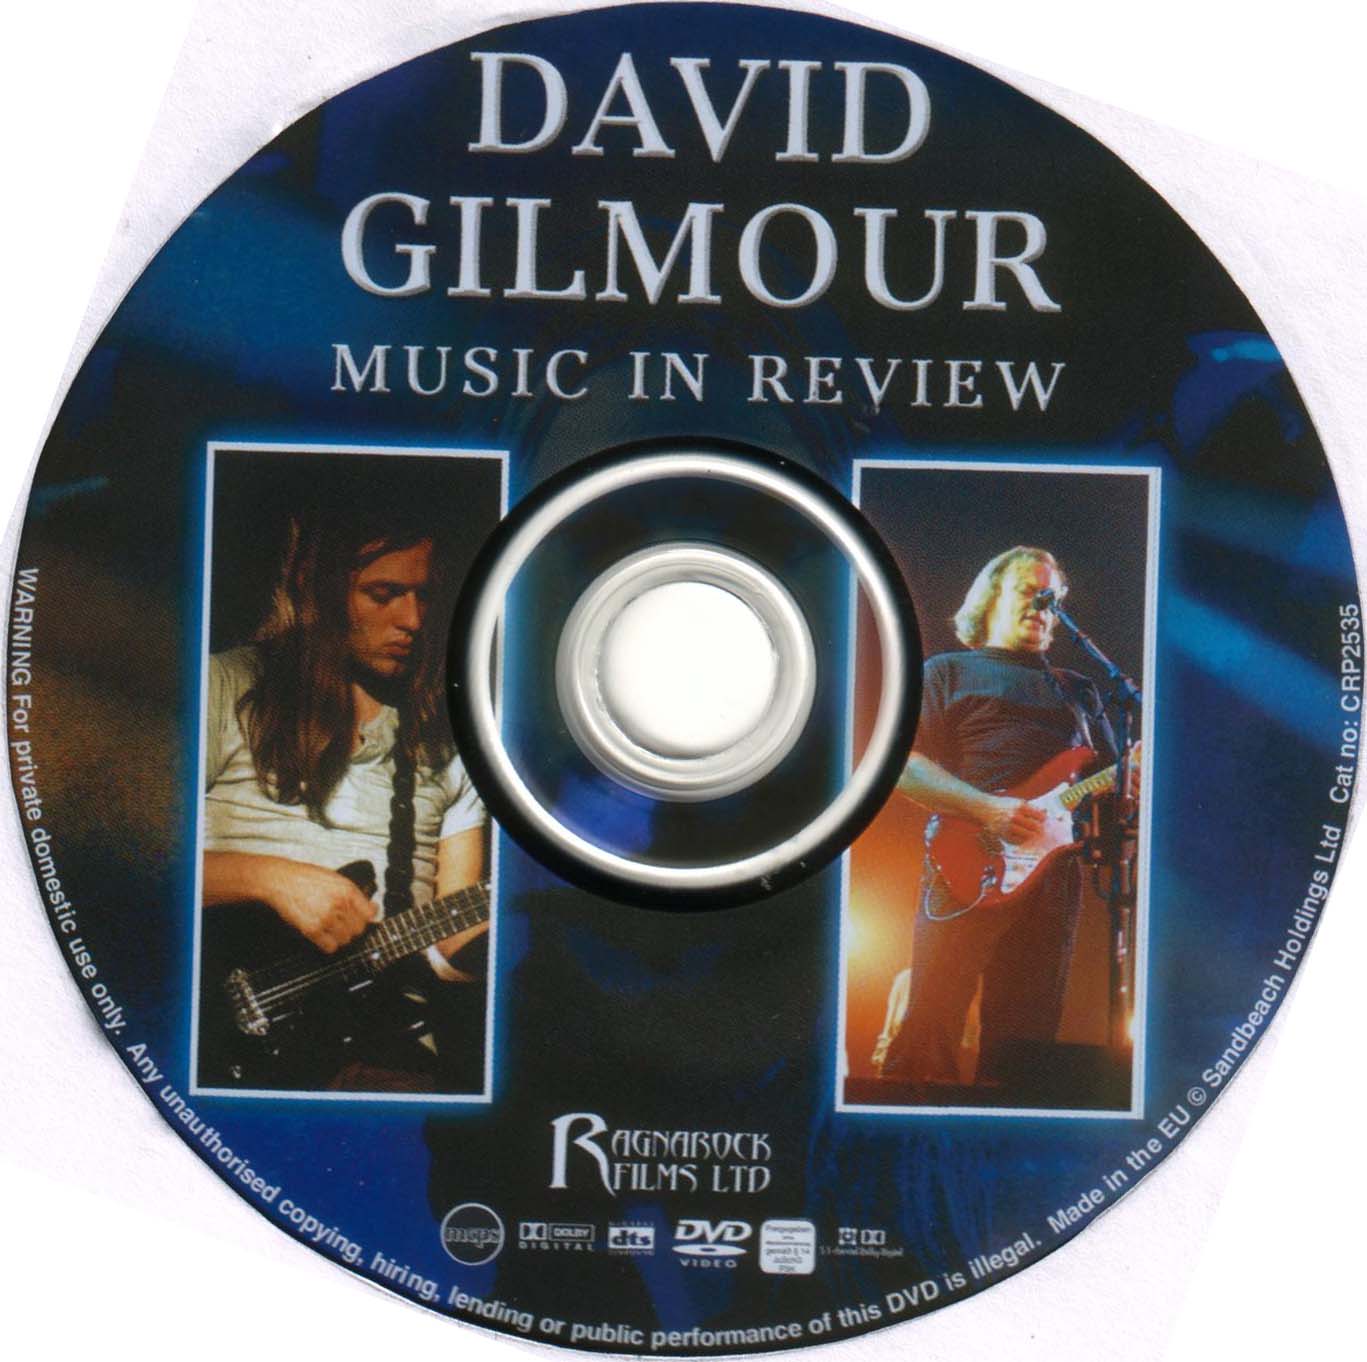 David Gilmour Music In Review